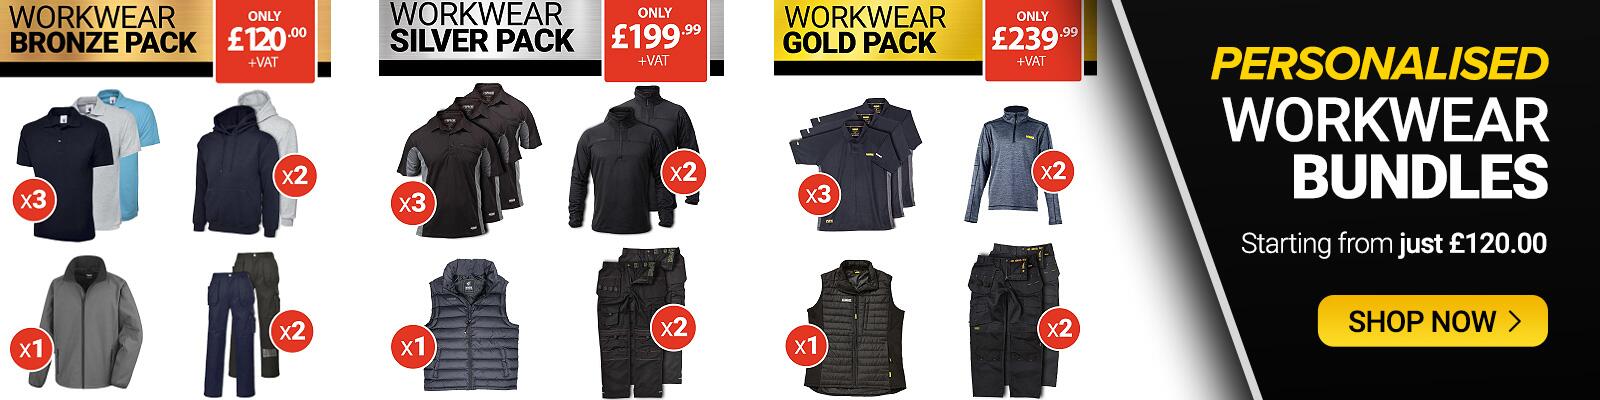 Discounted Workwear Bundles - Printed or Embroidered Logos Included in Price